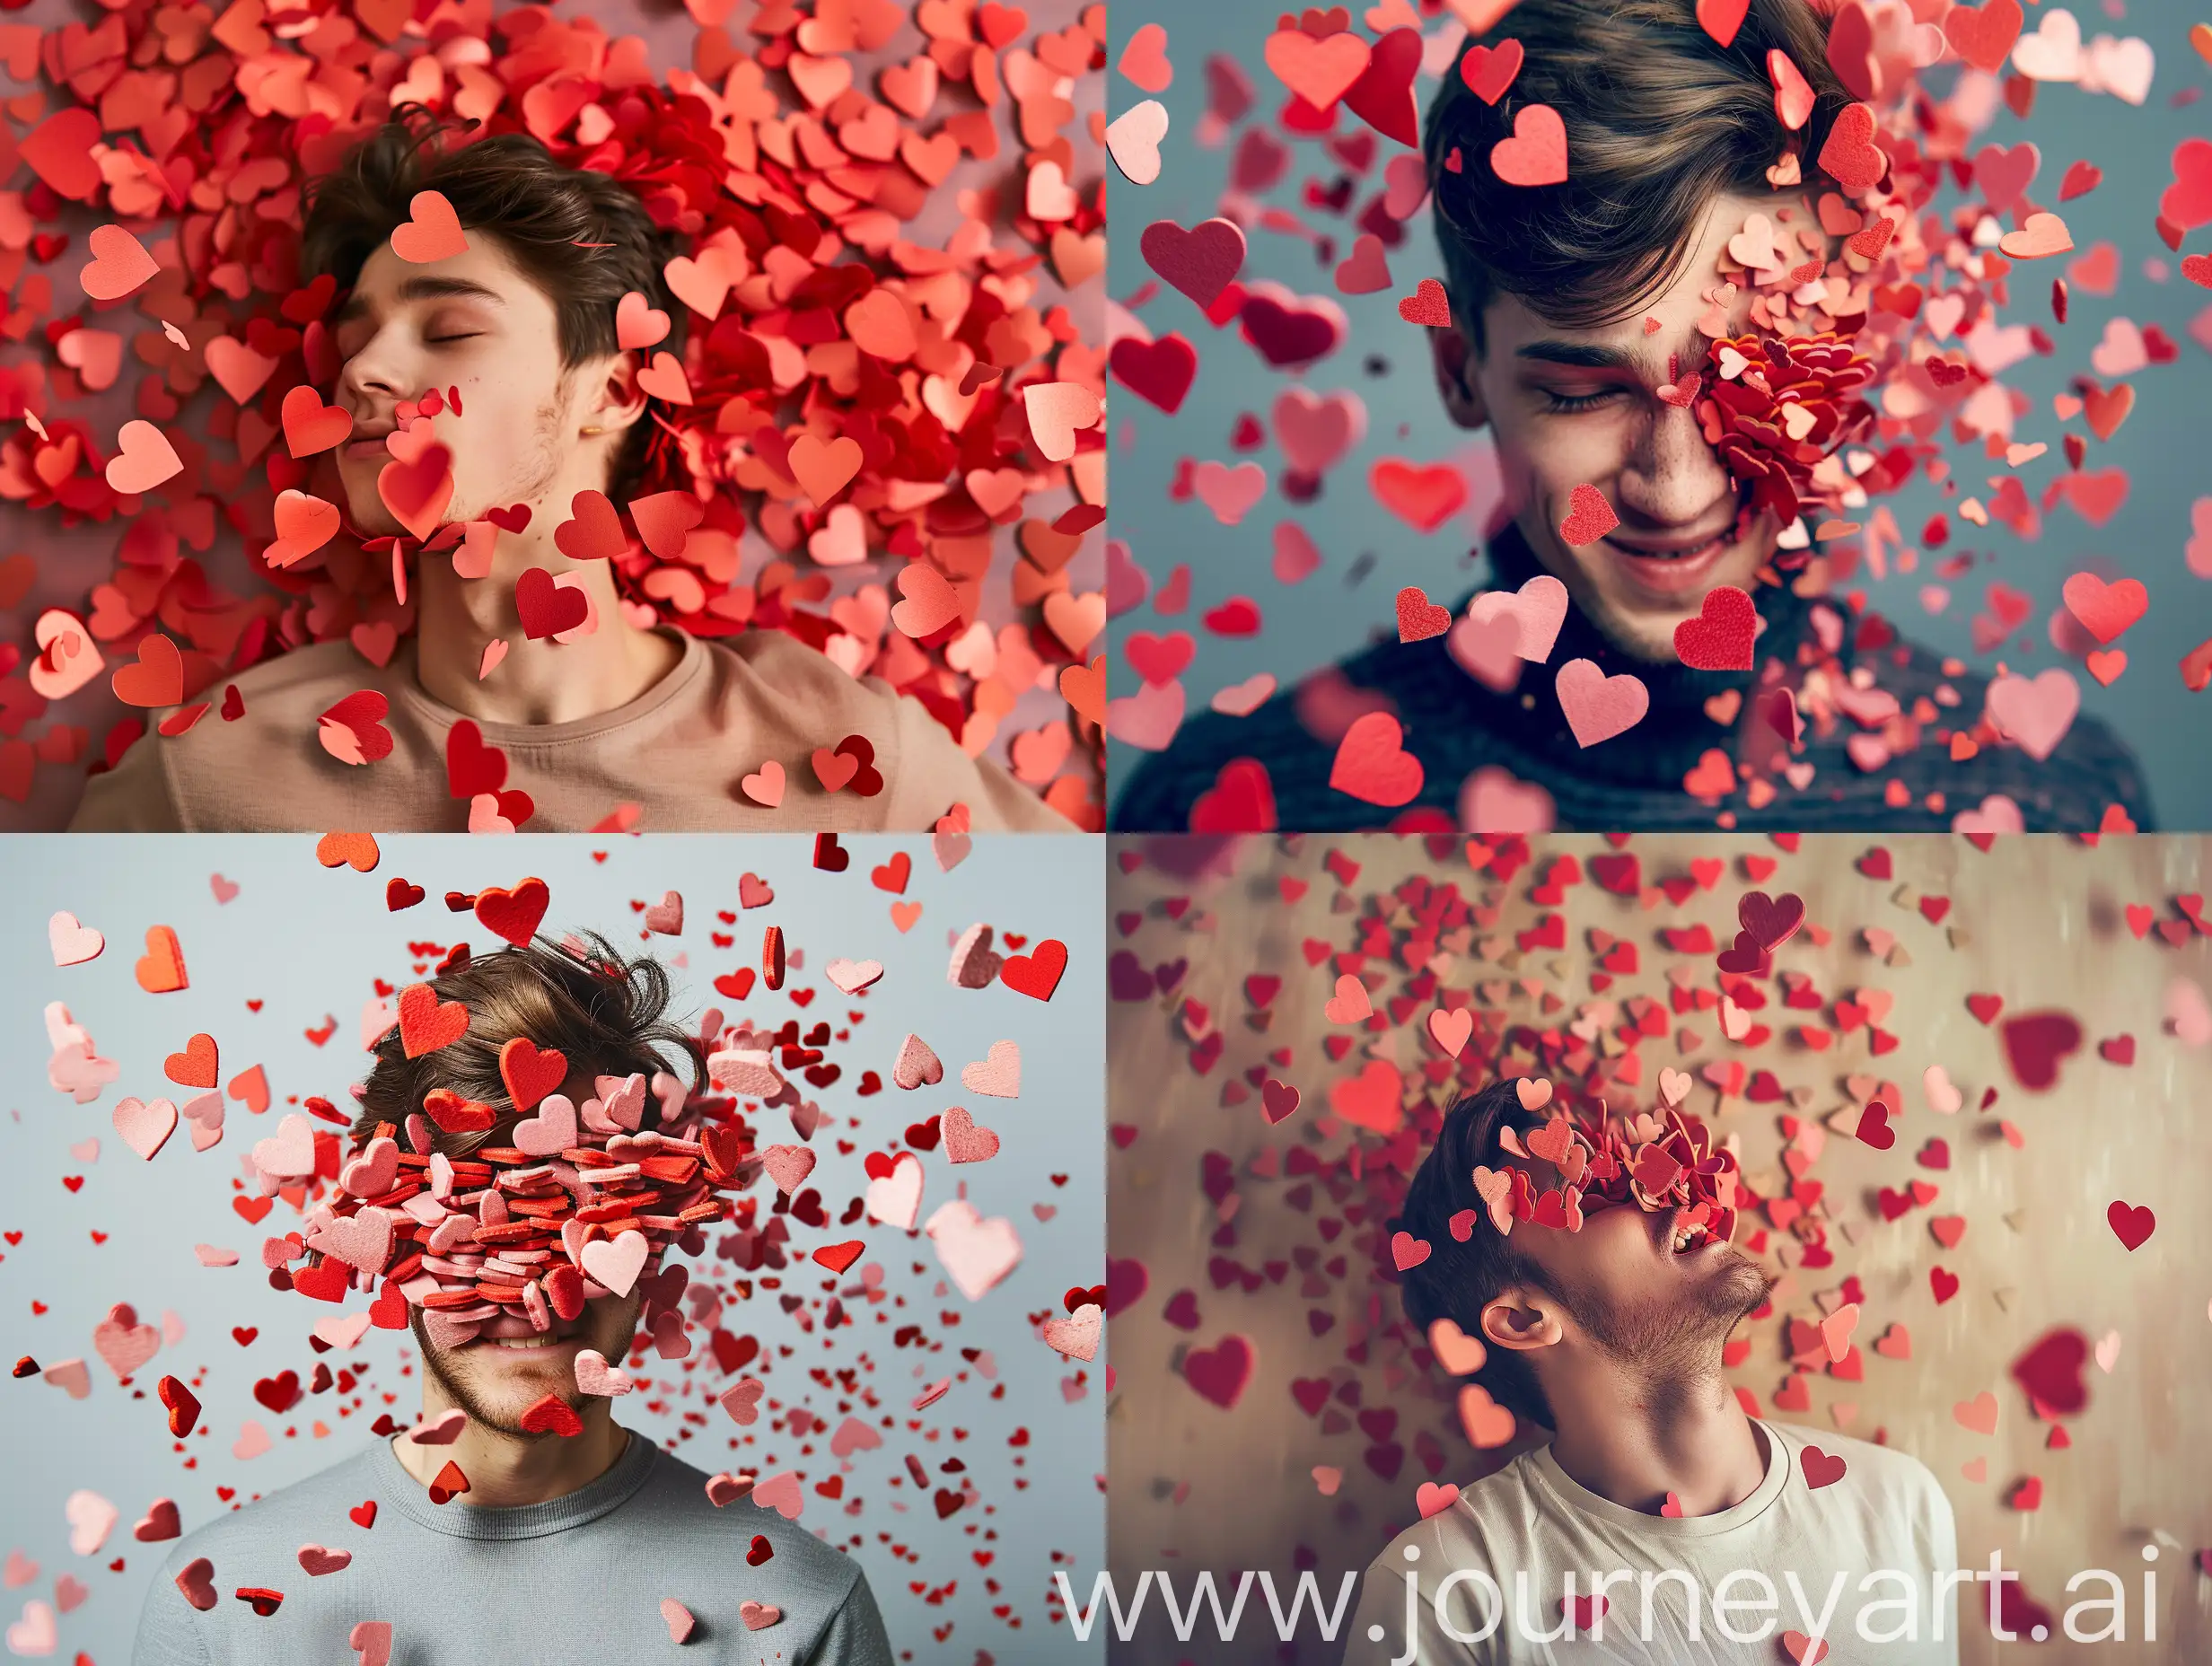 Tragic-Romance-Handsome-Man-Crushed-by-Red-and-Pink-Hearts